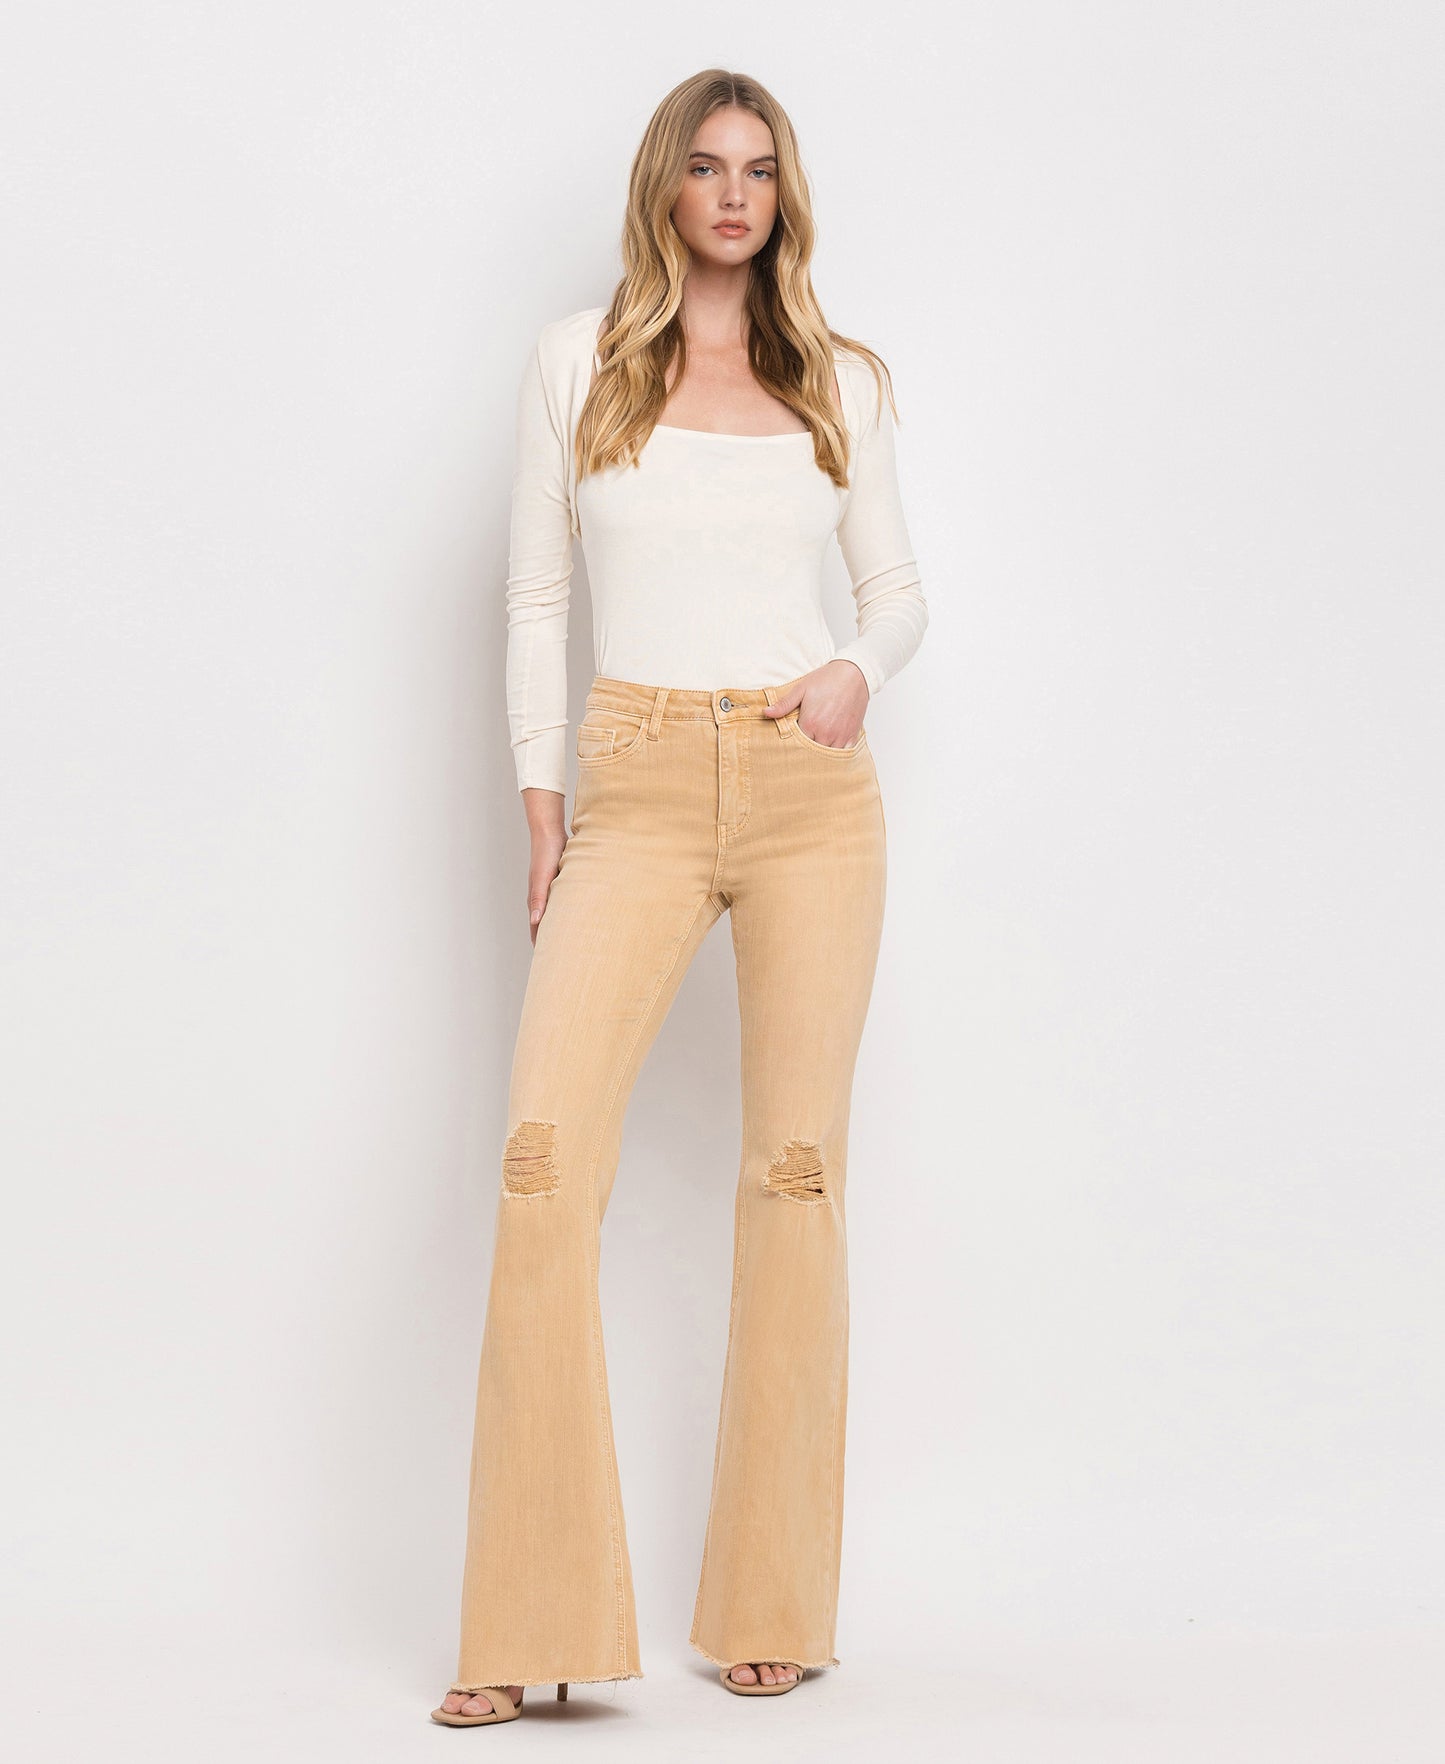 Front product images of Dew Drop - High Rise Flare Jeans